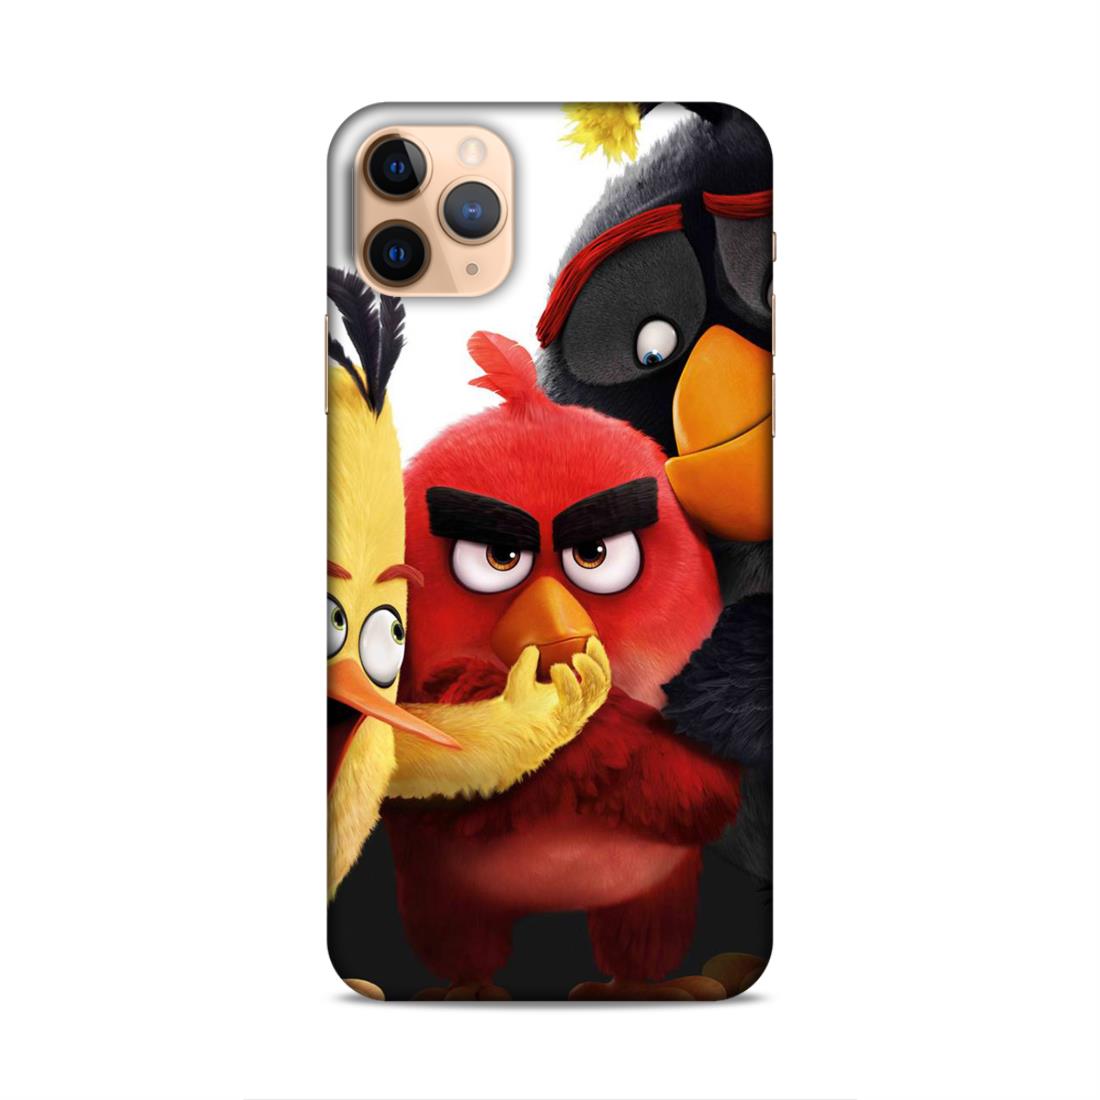 Angry Bird Smile Hard Back Case For Apple iPhone 11 Pro